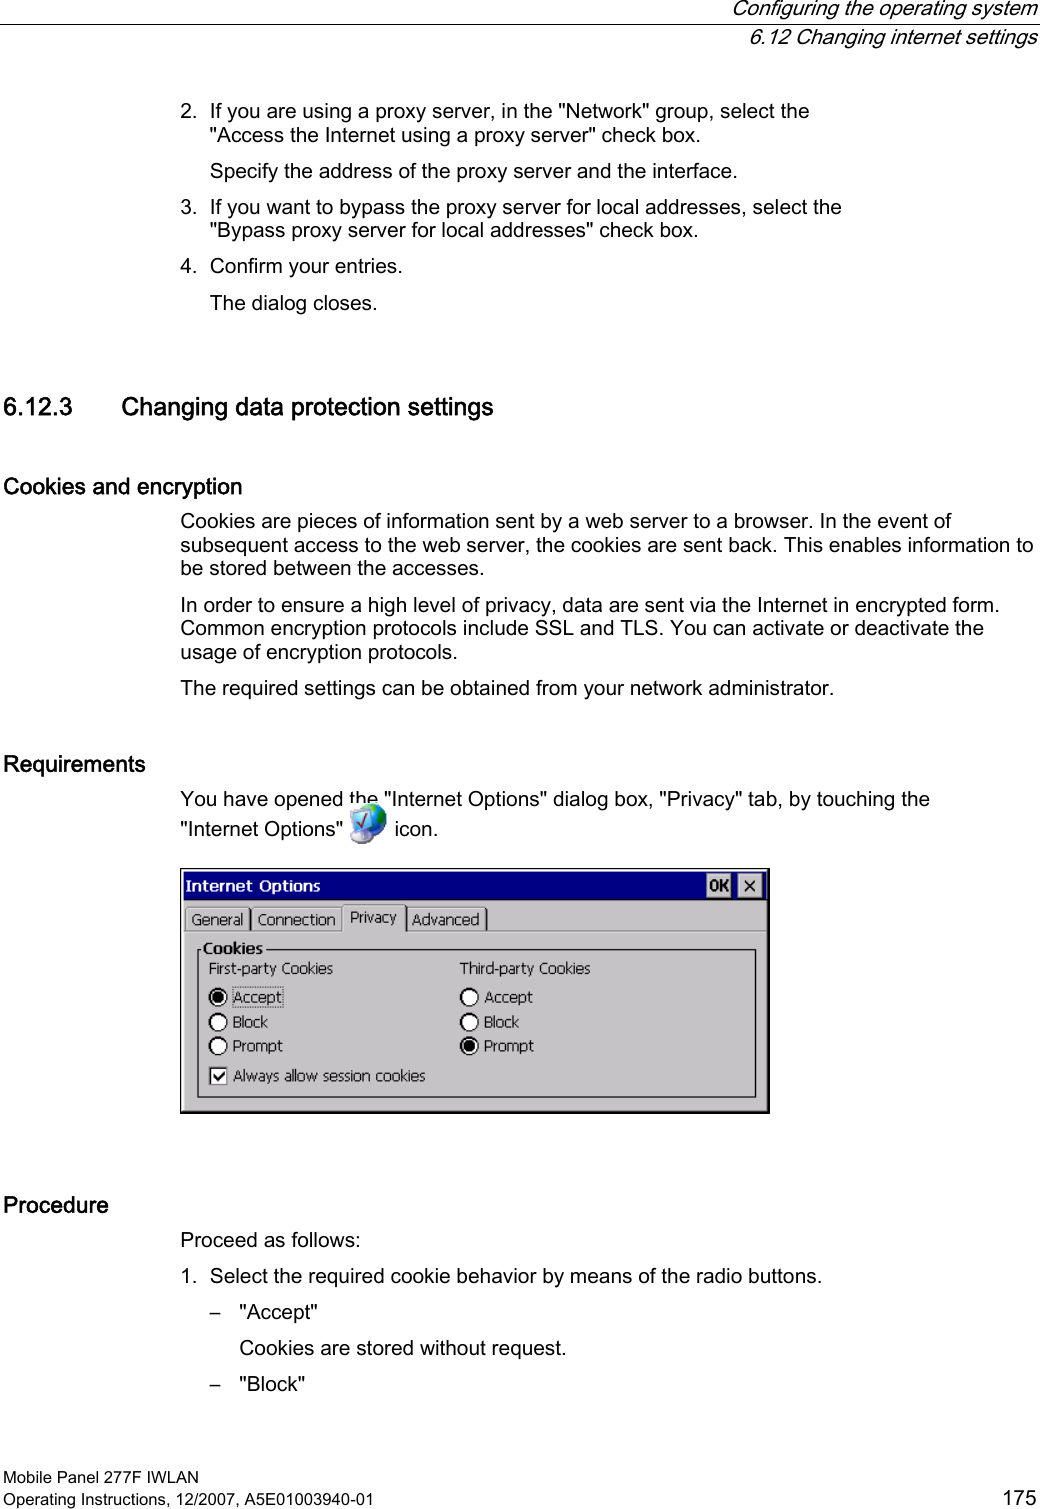  Configuring the operating system  6.12 Changing internet settings Mobile Panel 277F IWLAN Operating Instructions, 12/2007, A5E01003940-01  175 2. If you are using a proxy server, in the &quot;Network&quot; group, select the &quot;Access the Internet using a proxy server&quot; check box. Specify the address of the proxy server and the interface. 3. If you want to bypass the proxy server for local addresses, select the &quot;Bypass proxy server for local addresses&quot; check box. 4. Confirm your entries. The dialog closes. 6.12.3 Changing data protection settings Cookies and encryption  Cookies are pieces of information sent by a web server to a browser. In the event of subsequent access to the web server, the cookies are sent back. This enables information to be stored between the accesses. In order to ensure a high level of privacy, data are sent via the Internet in encrypted form. Common encryption protocols include SSL and TLS. You can activate or deactivate the usage of encryption protocols.  The required settings can be obtained from your network administrator. Requirements  You have opened the &quot;Internet Options&quot; dialog box, &quot;Privacy&quot; tab, by touching the &quot;Internet Options&quot;   icon.   Procedure Proceed as follows: 1. Select the required cookie behavior by means of the radio buttons. –  &quot;Accept&quot; Cookies are stored without request. –  &quot;Block&quot; 